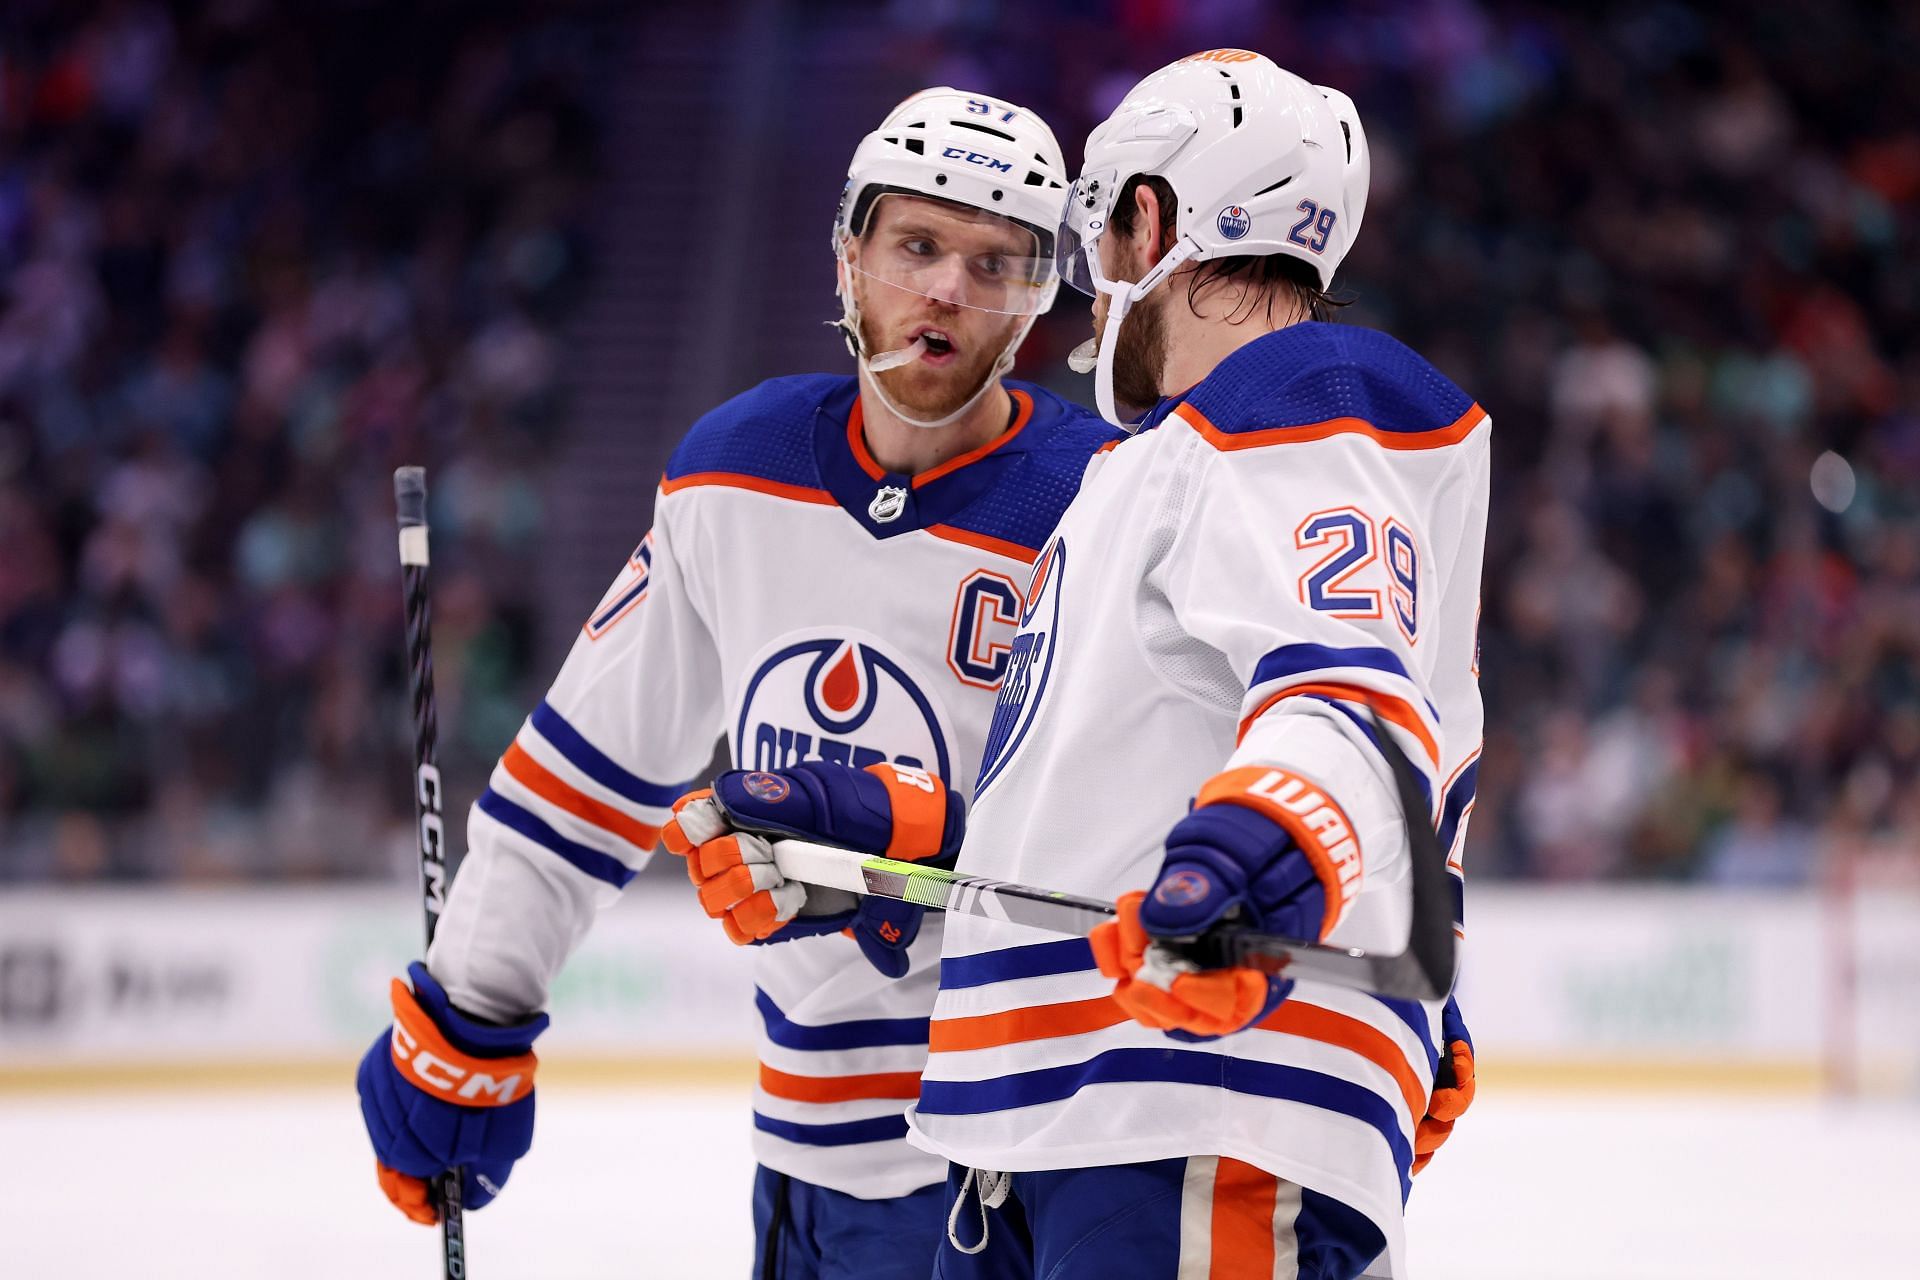 Arizona Coyotes vs Edmonton Oilers Live streaming options, how and where to watch NHL live on TV, Channel List and more